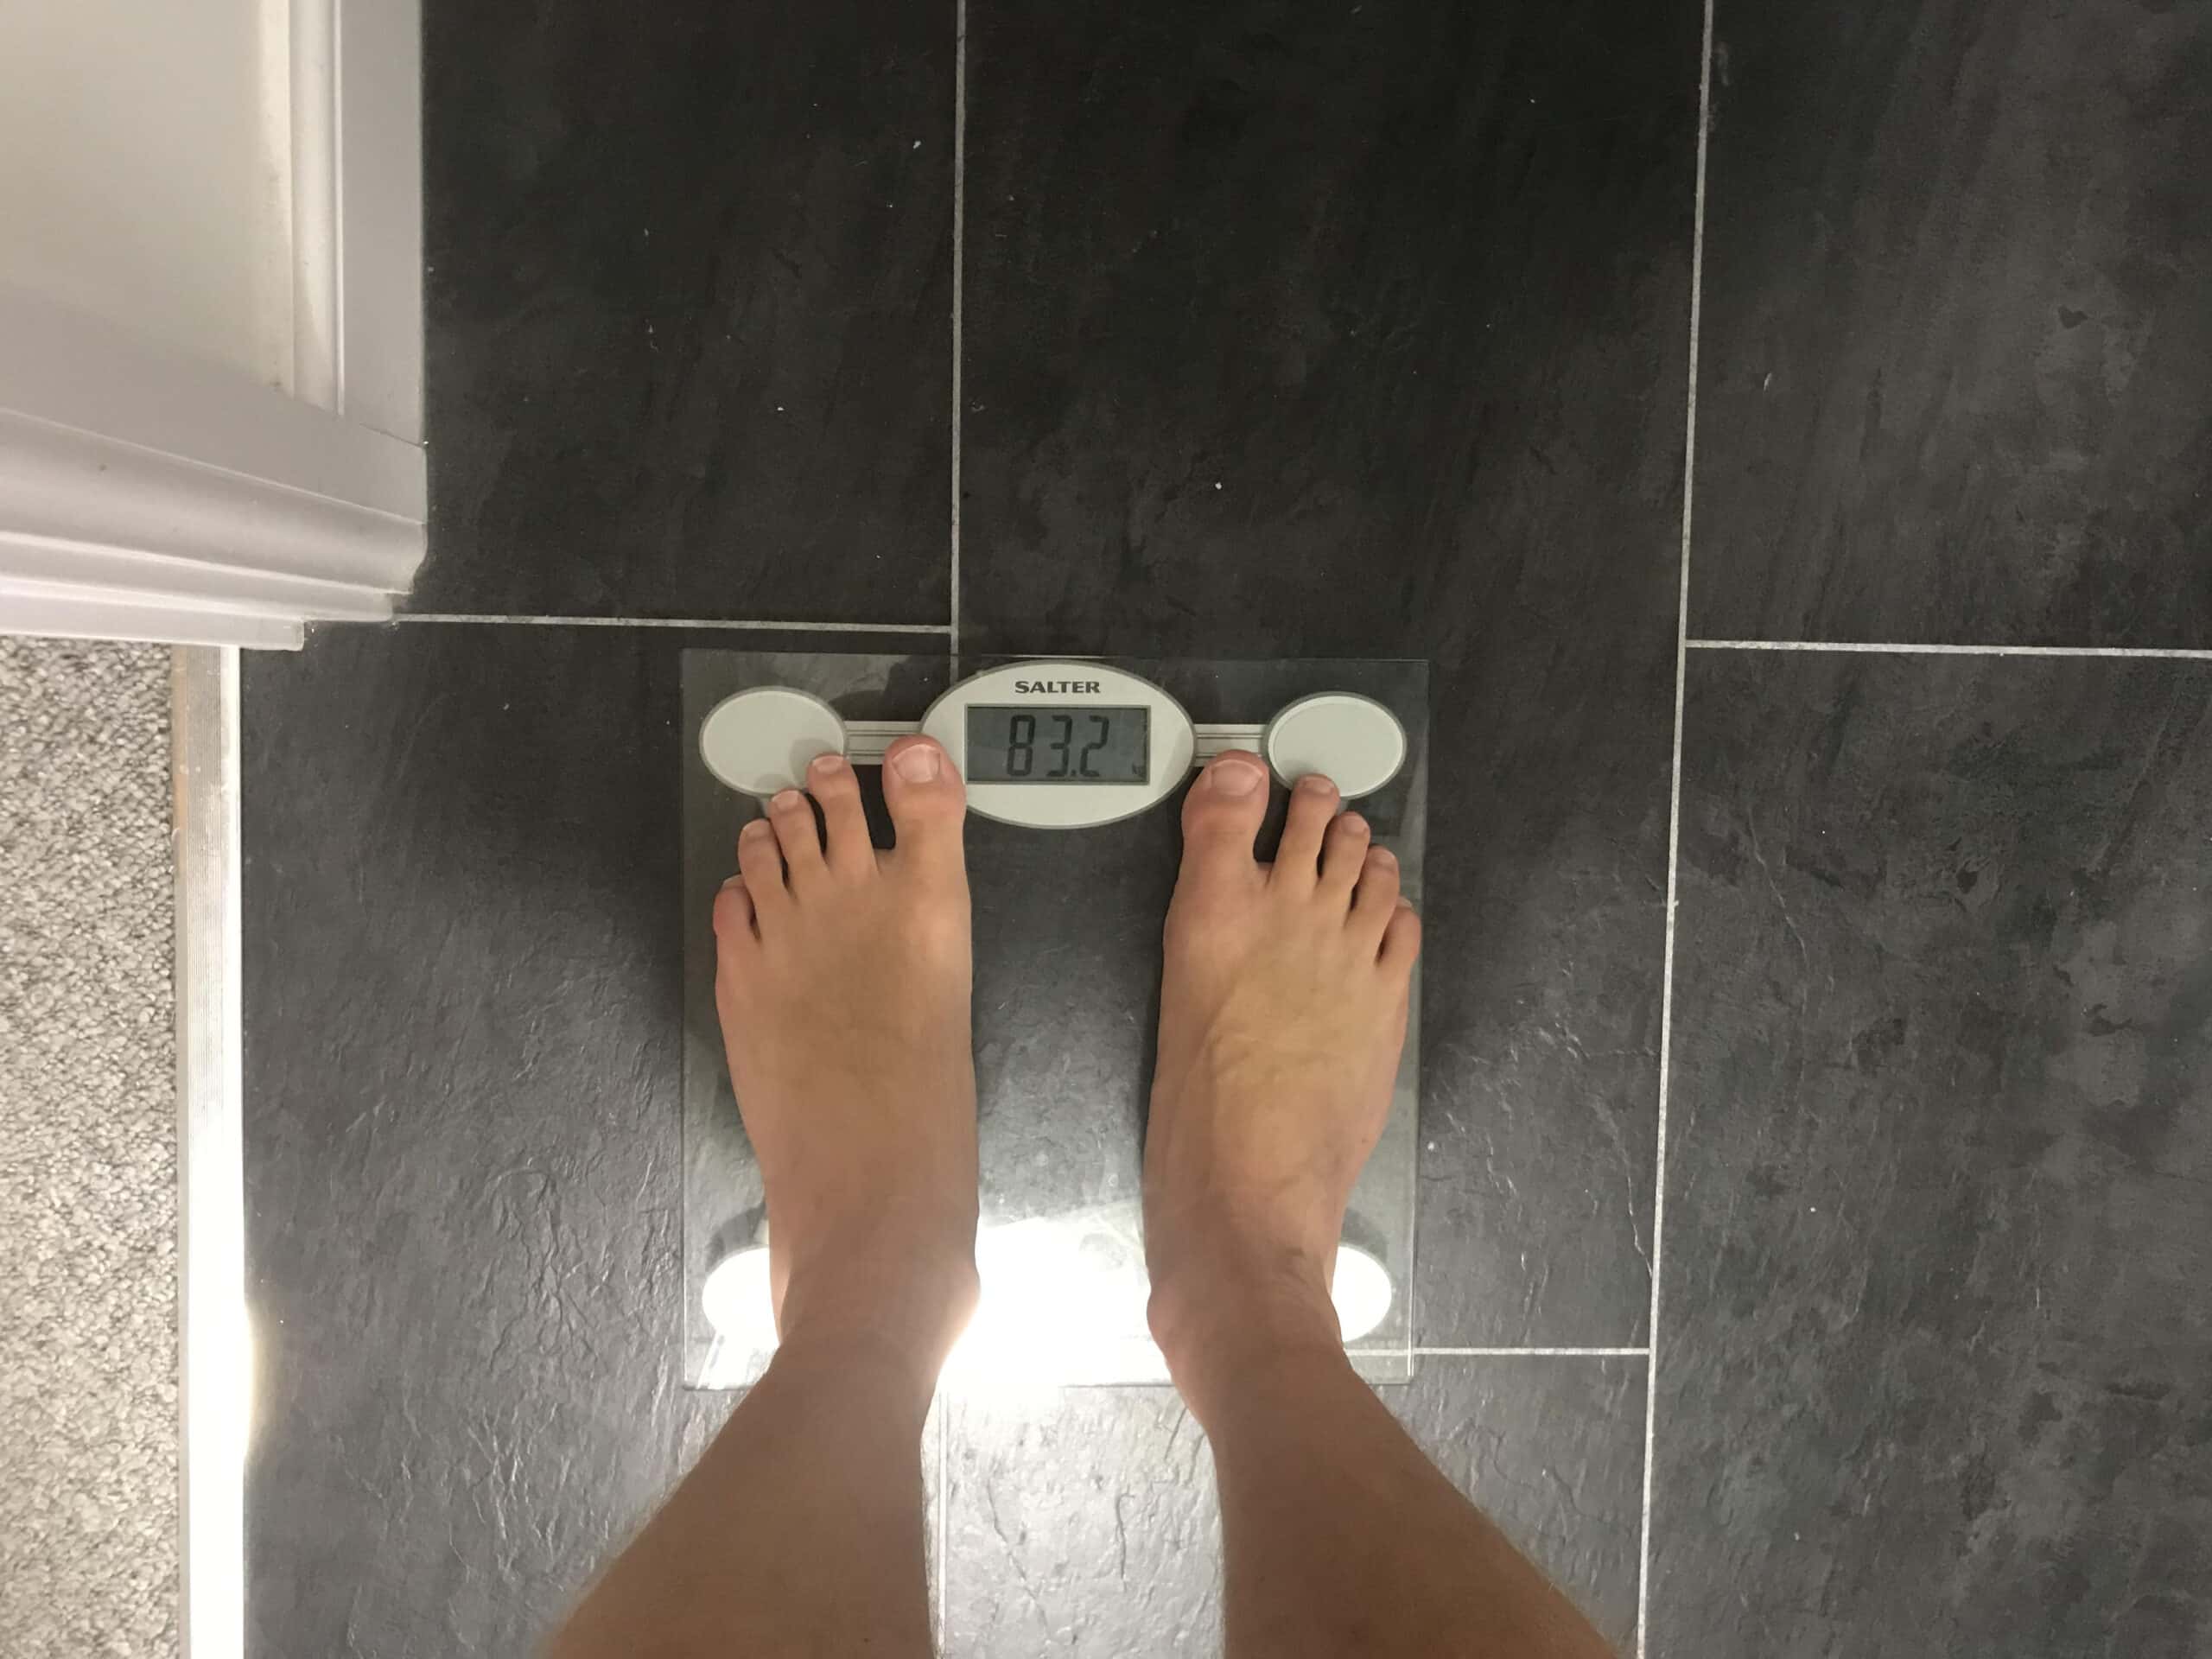 Weighing yourself daily